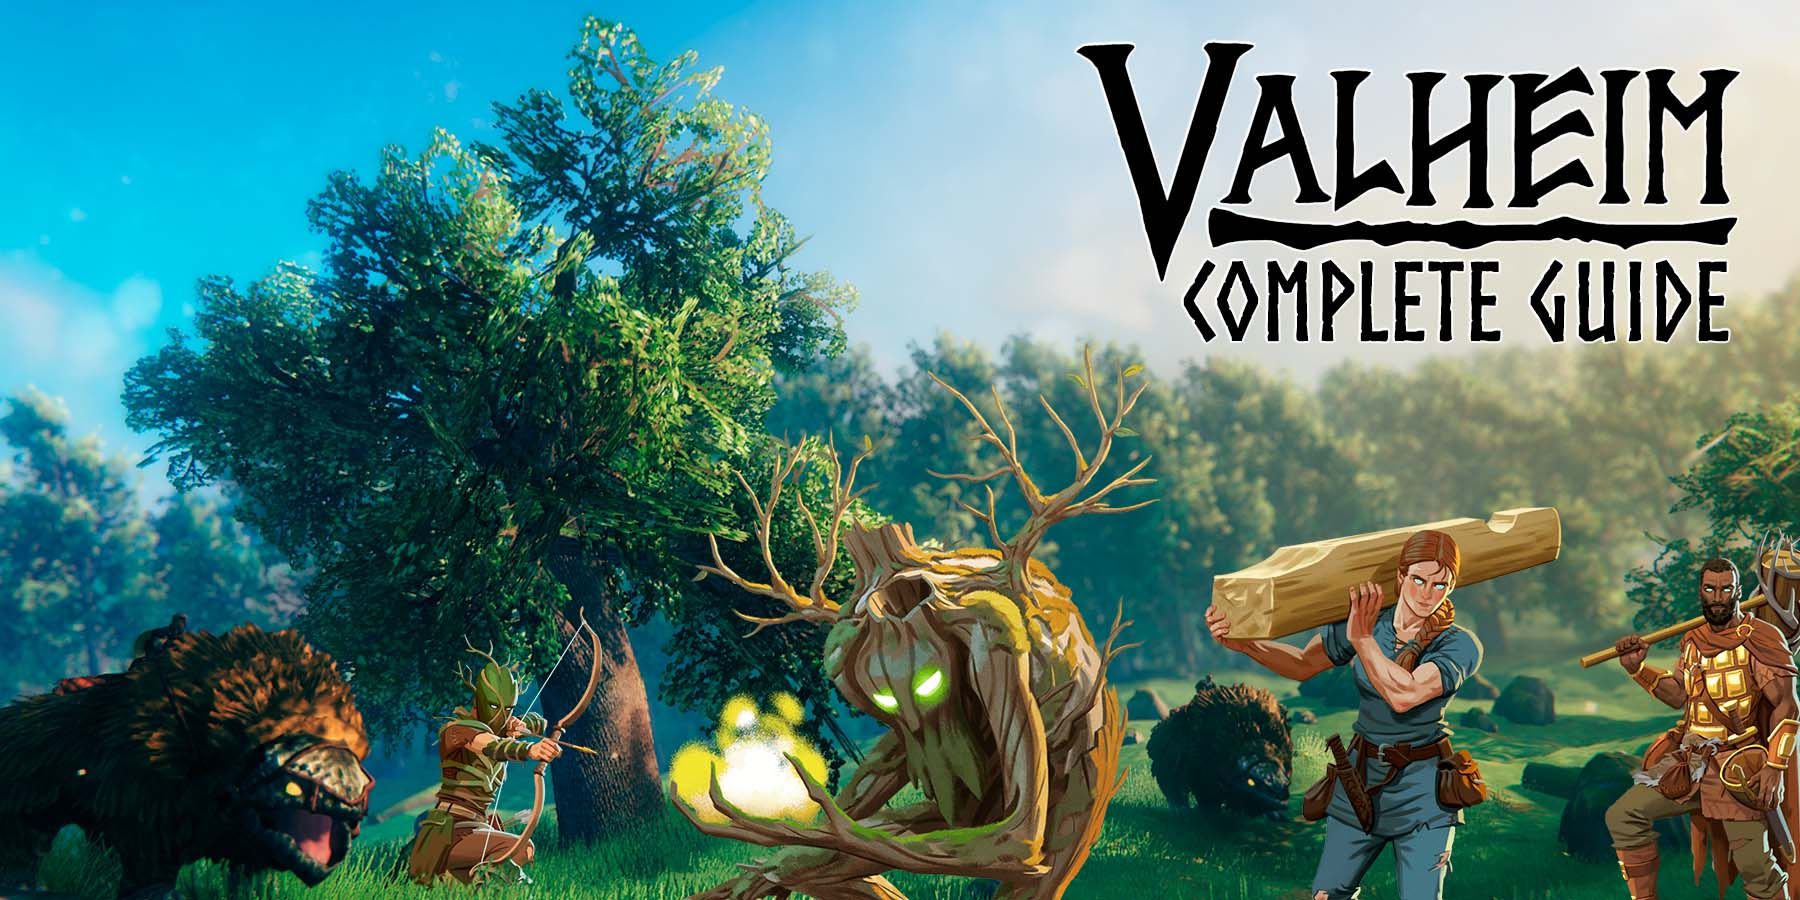 Valheim Complete Guide for Tips, Tricks, and General Help